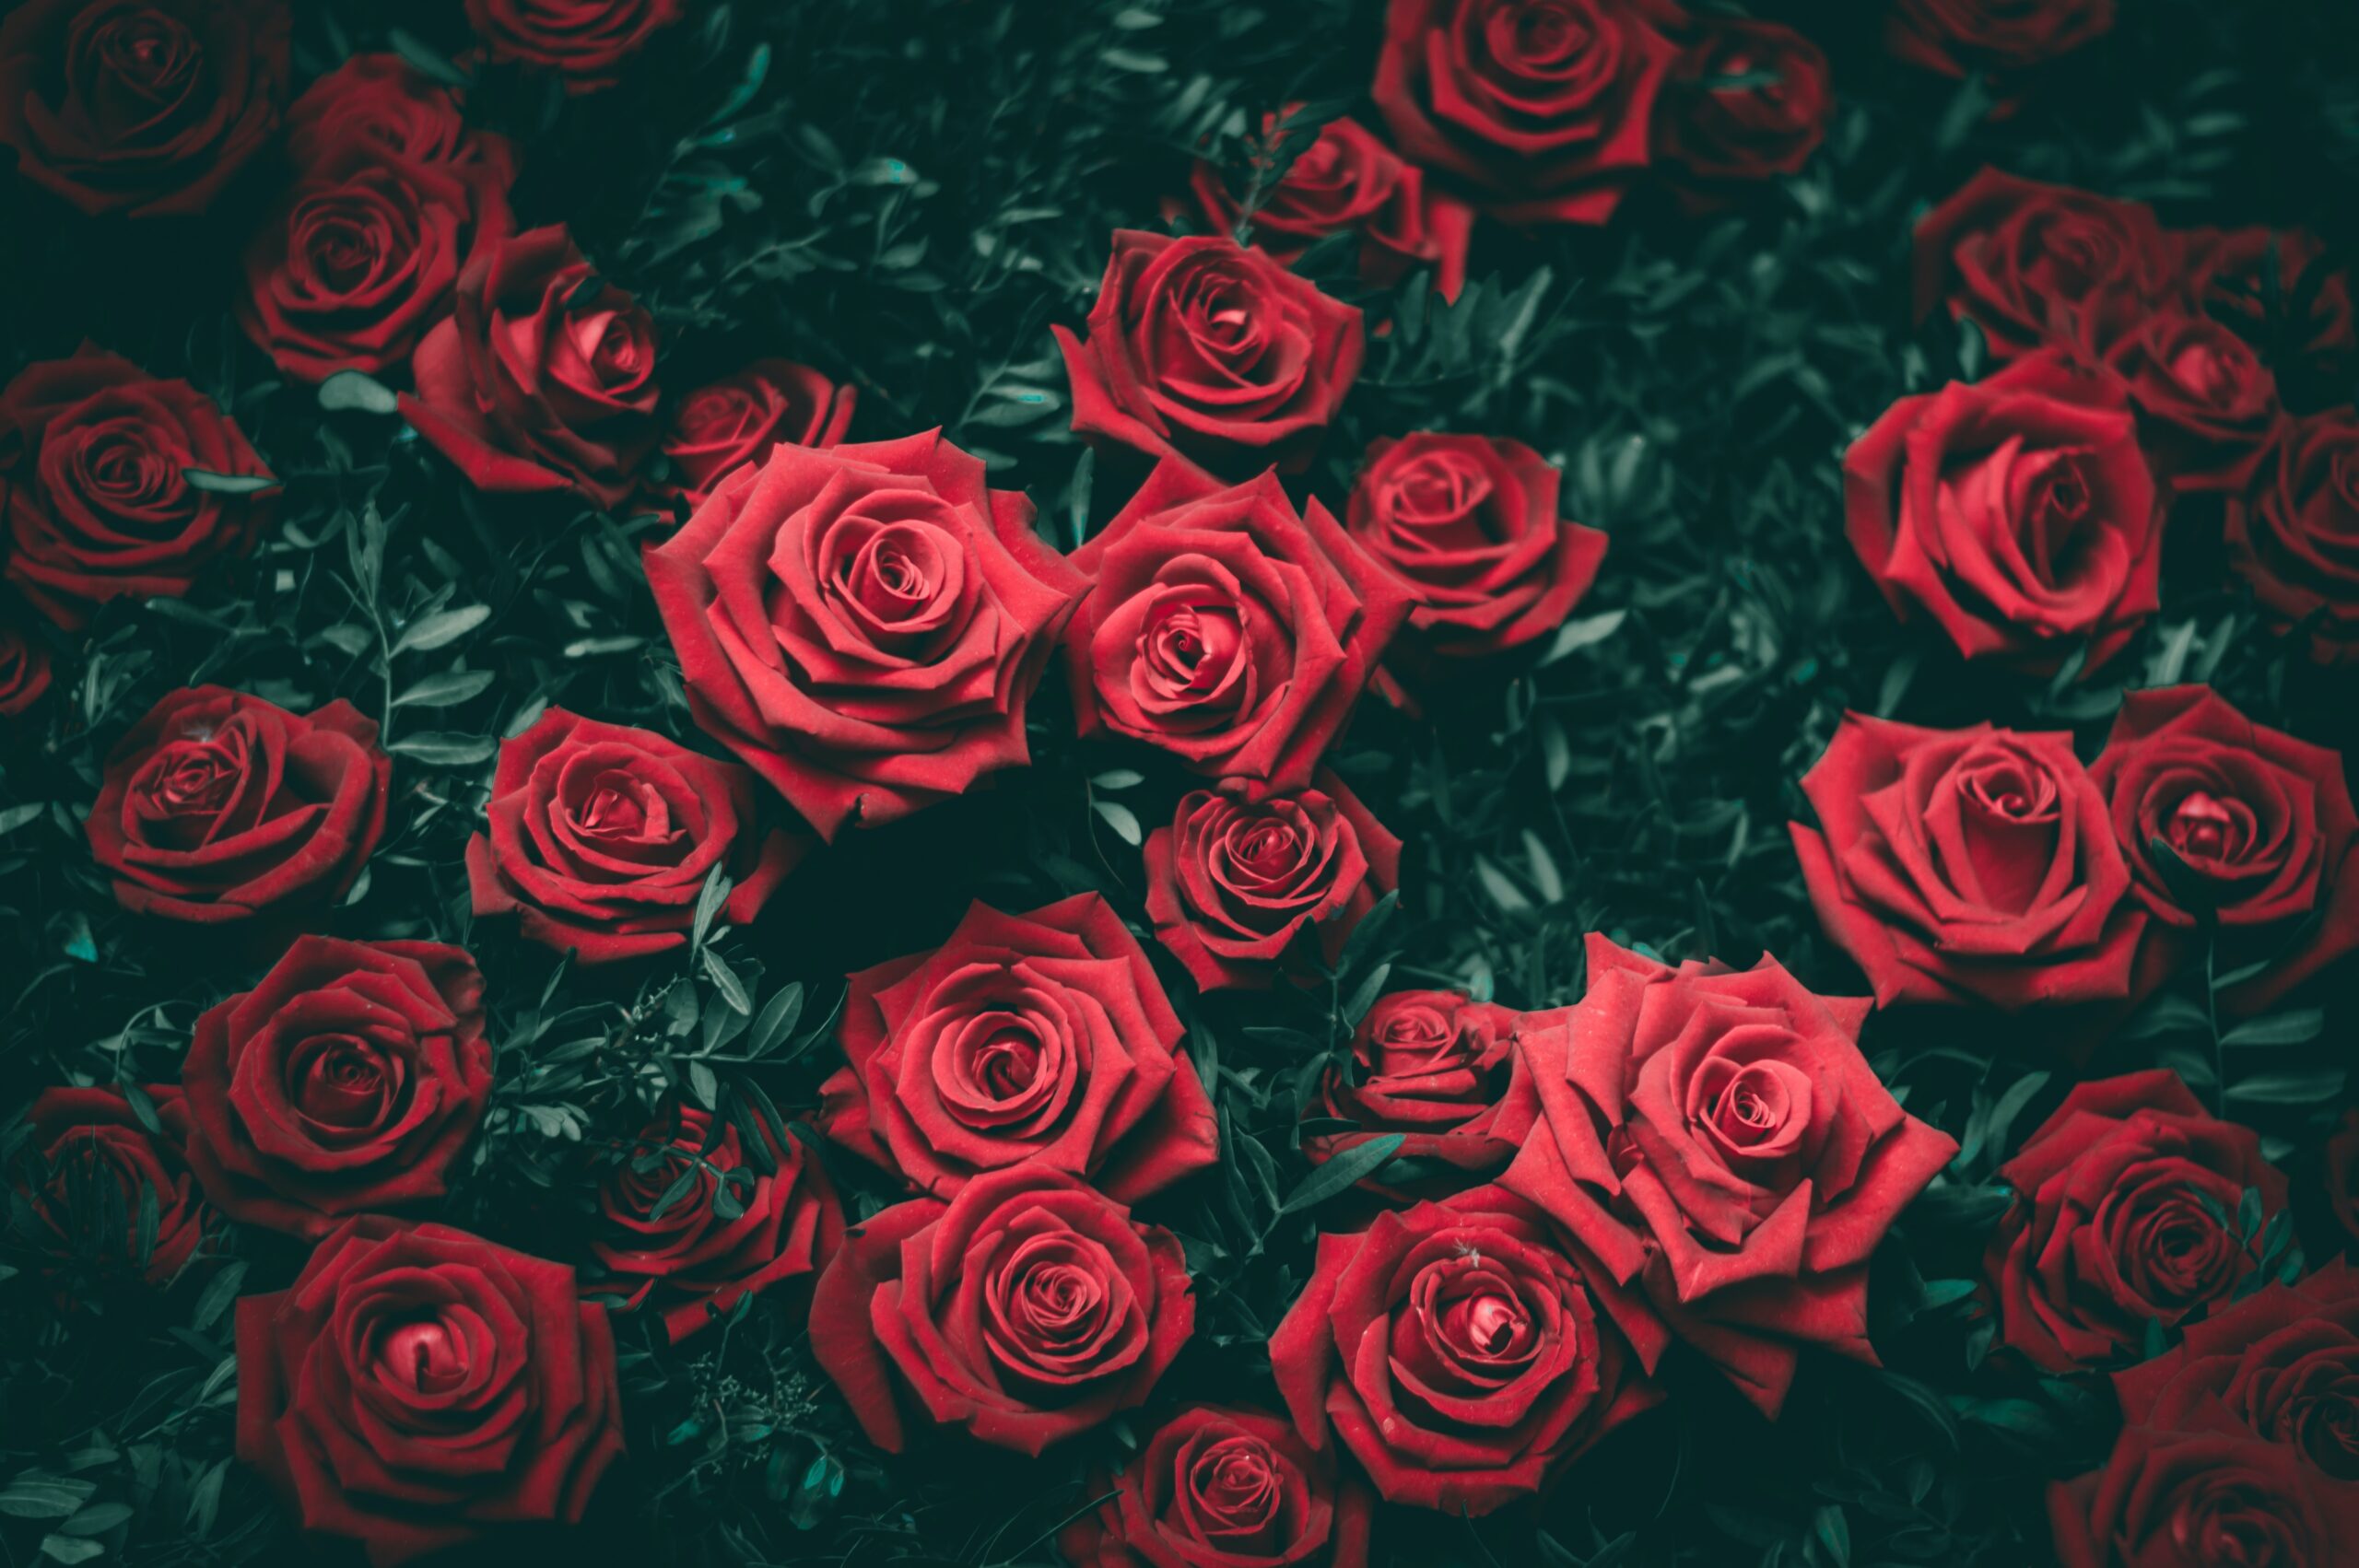 Red Roses - pic by Biel Morro on Unsplash